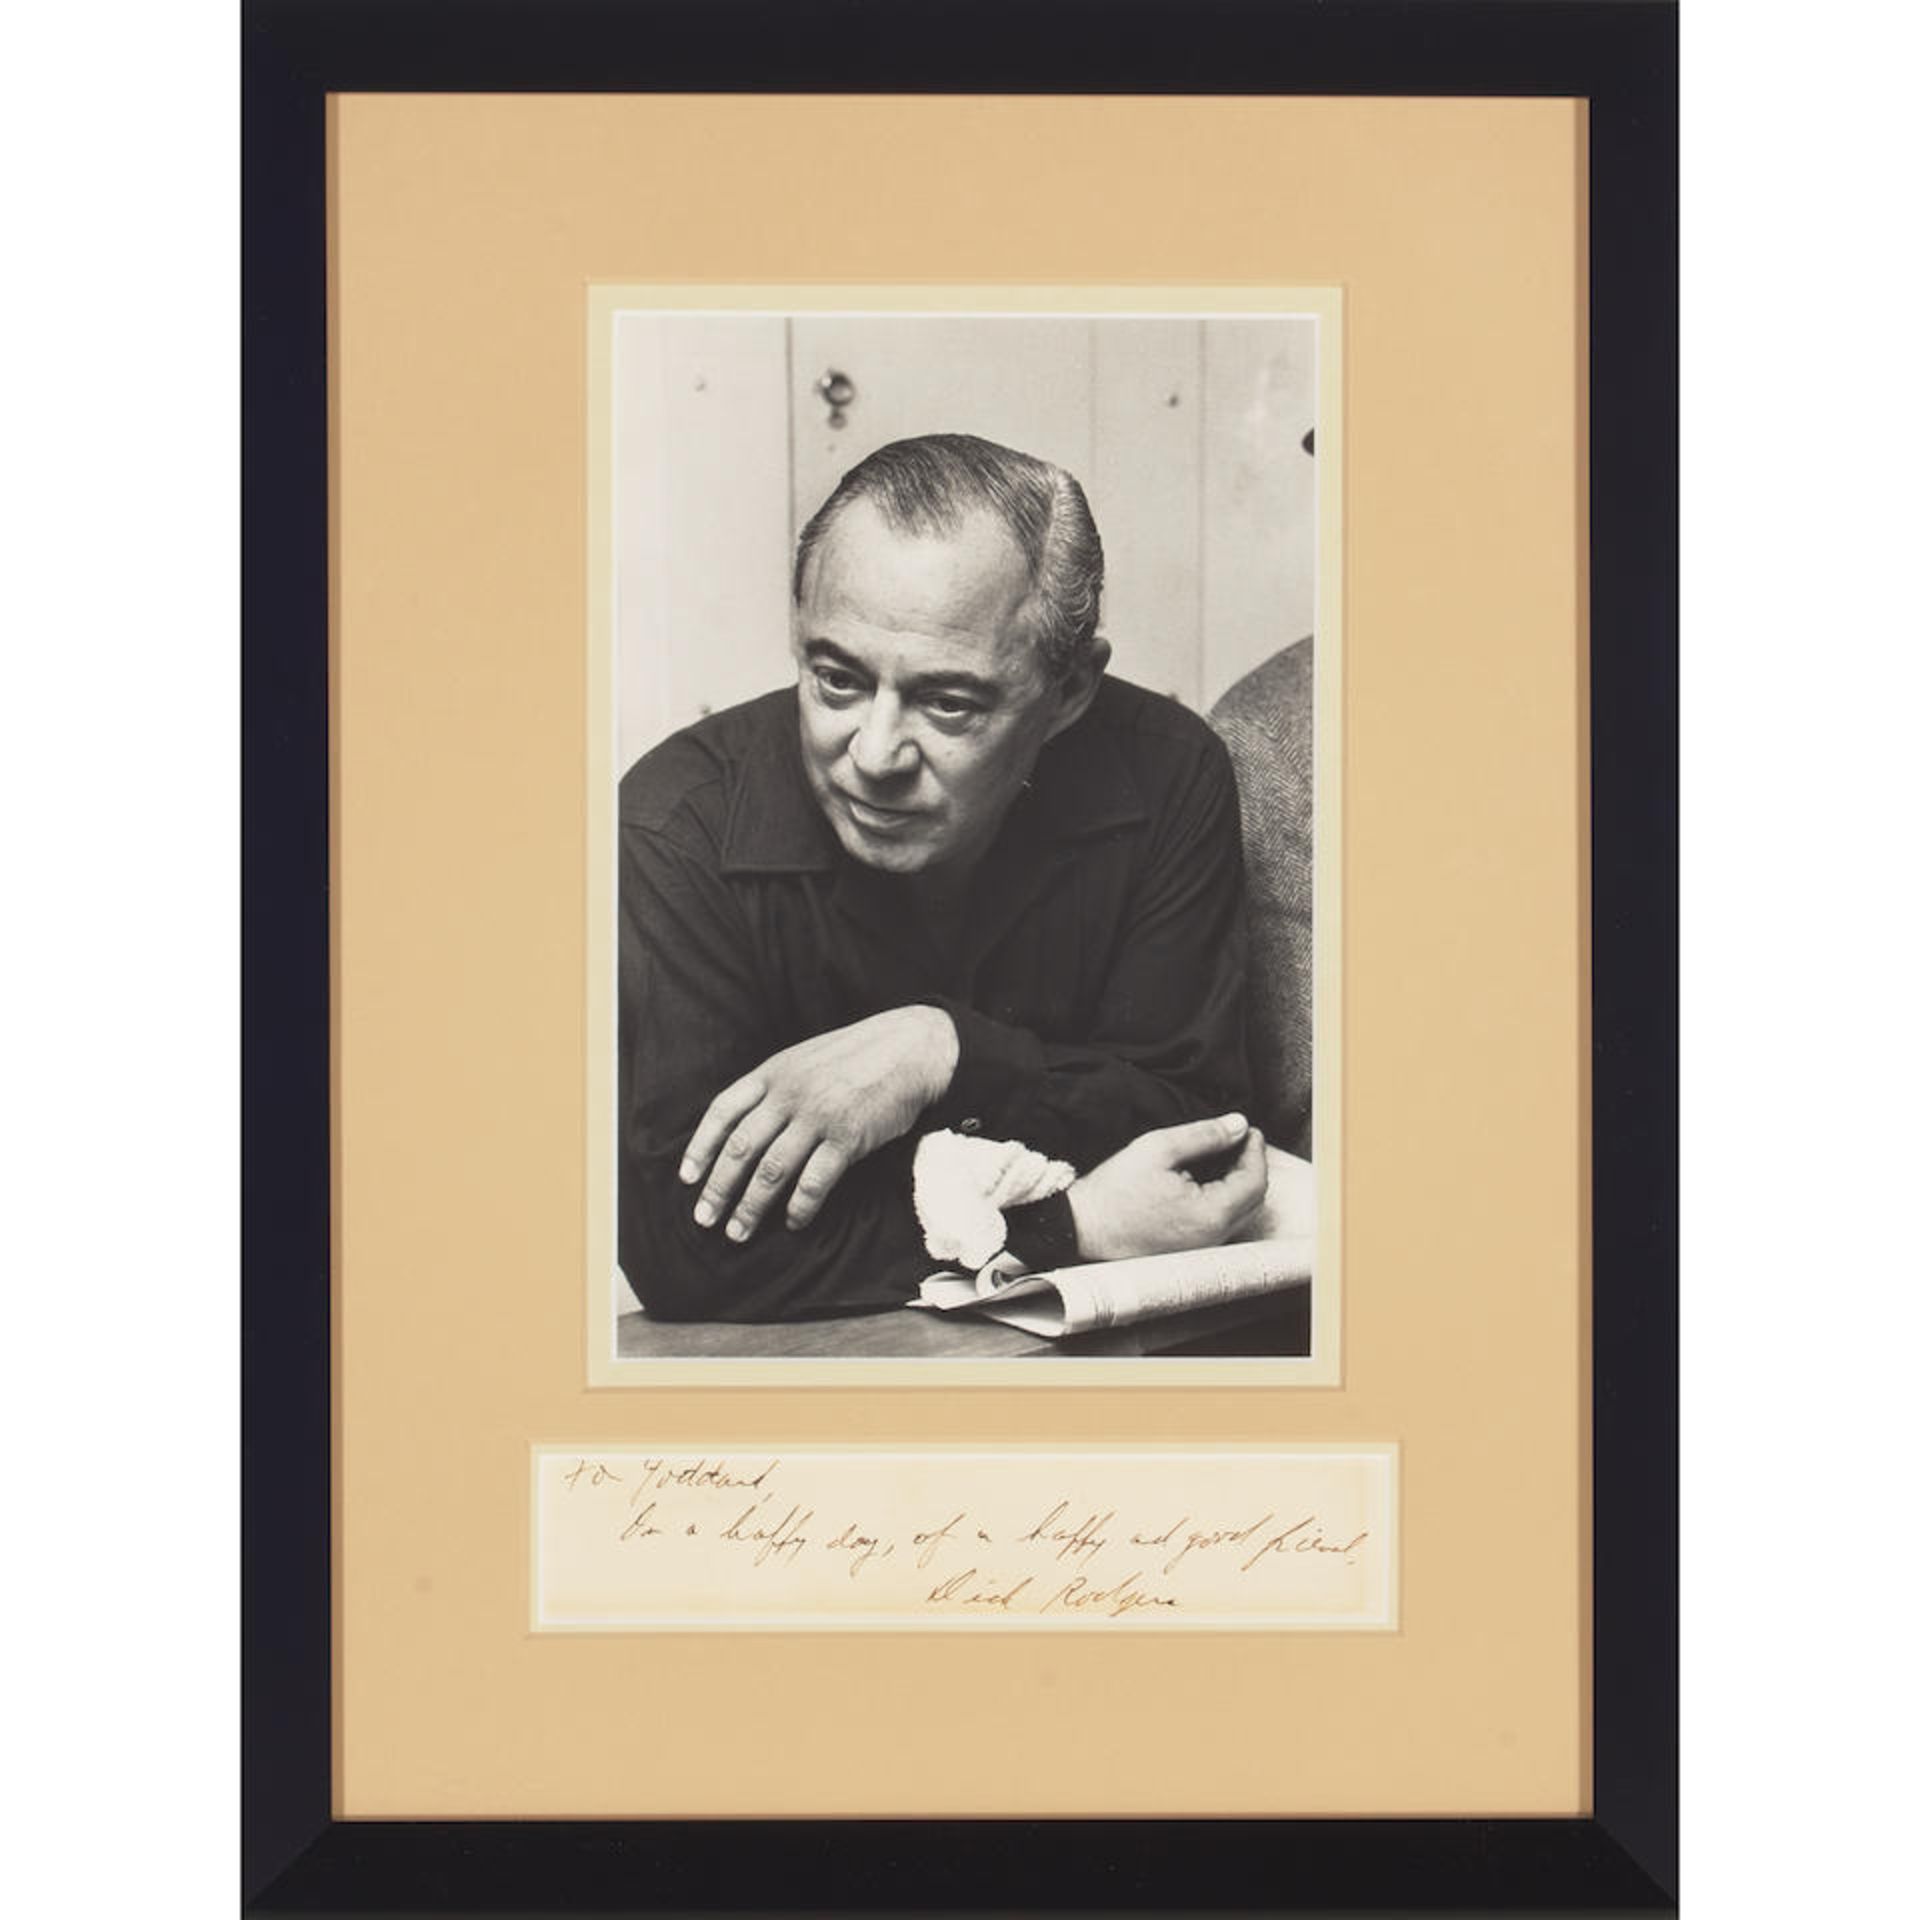 SIGNATURES OF RICHARD RODGERS, JEROME KERN, AND COLE PORTER. 3 items: